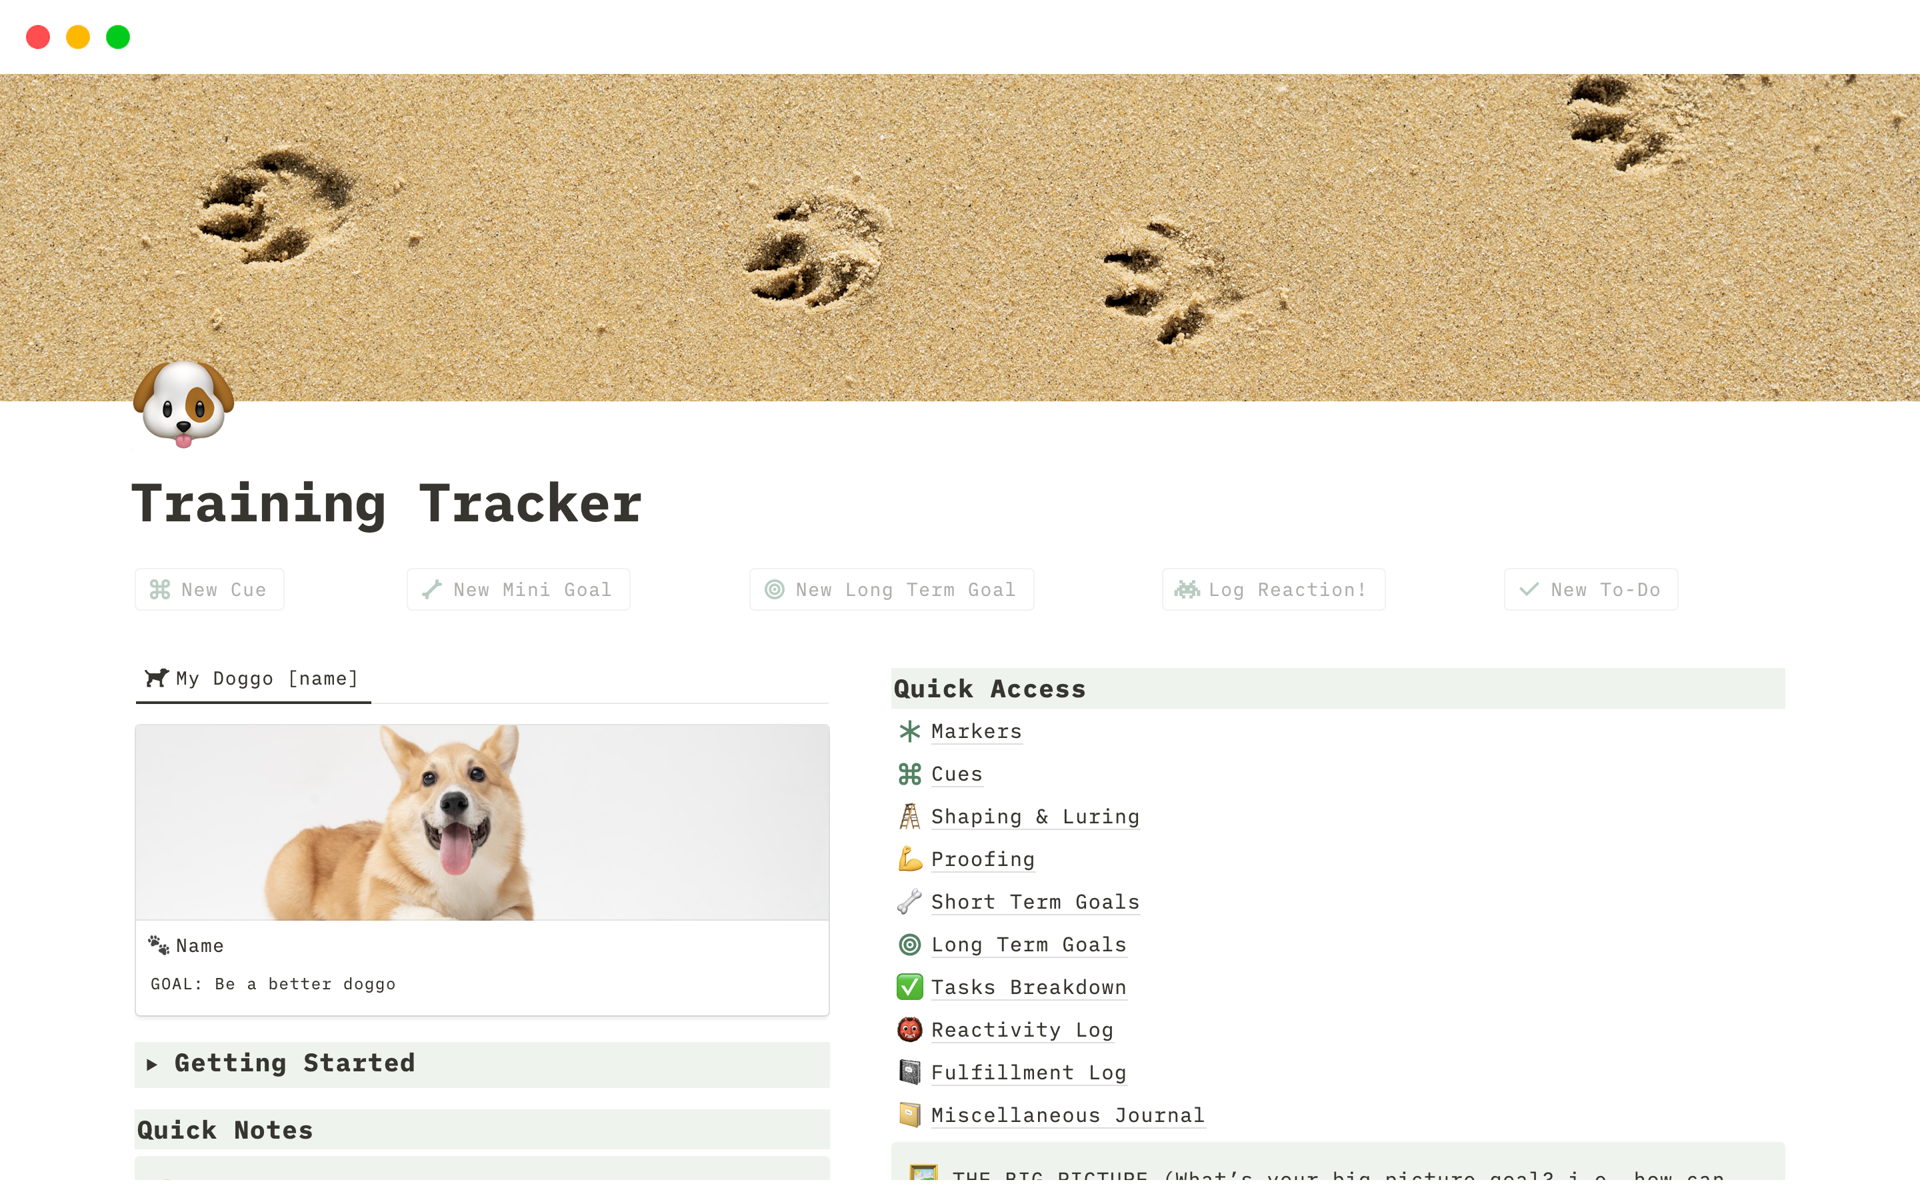 Help track training goals and progress with your dog.